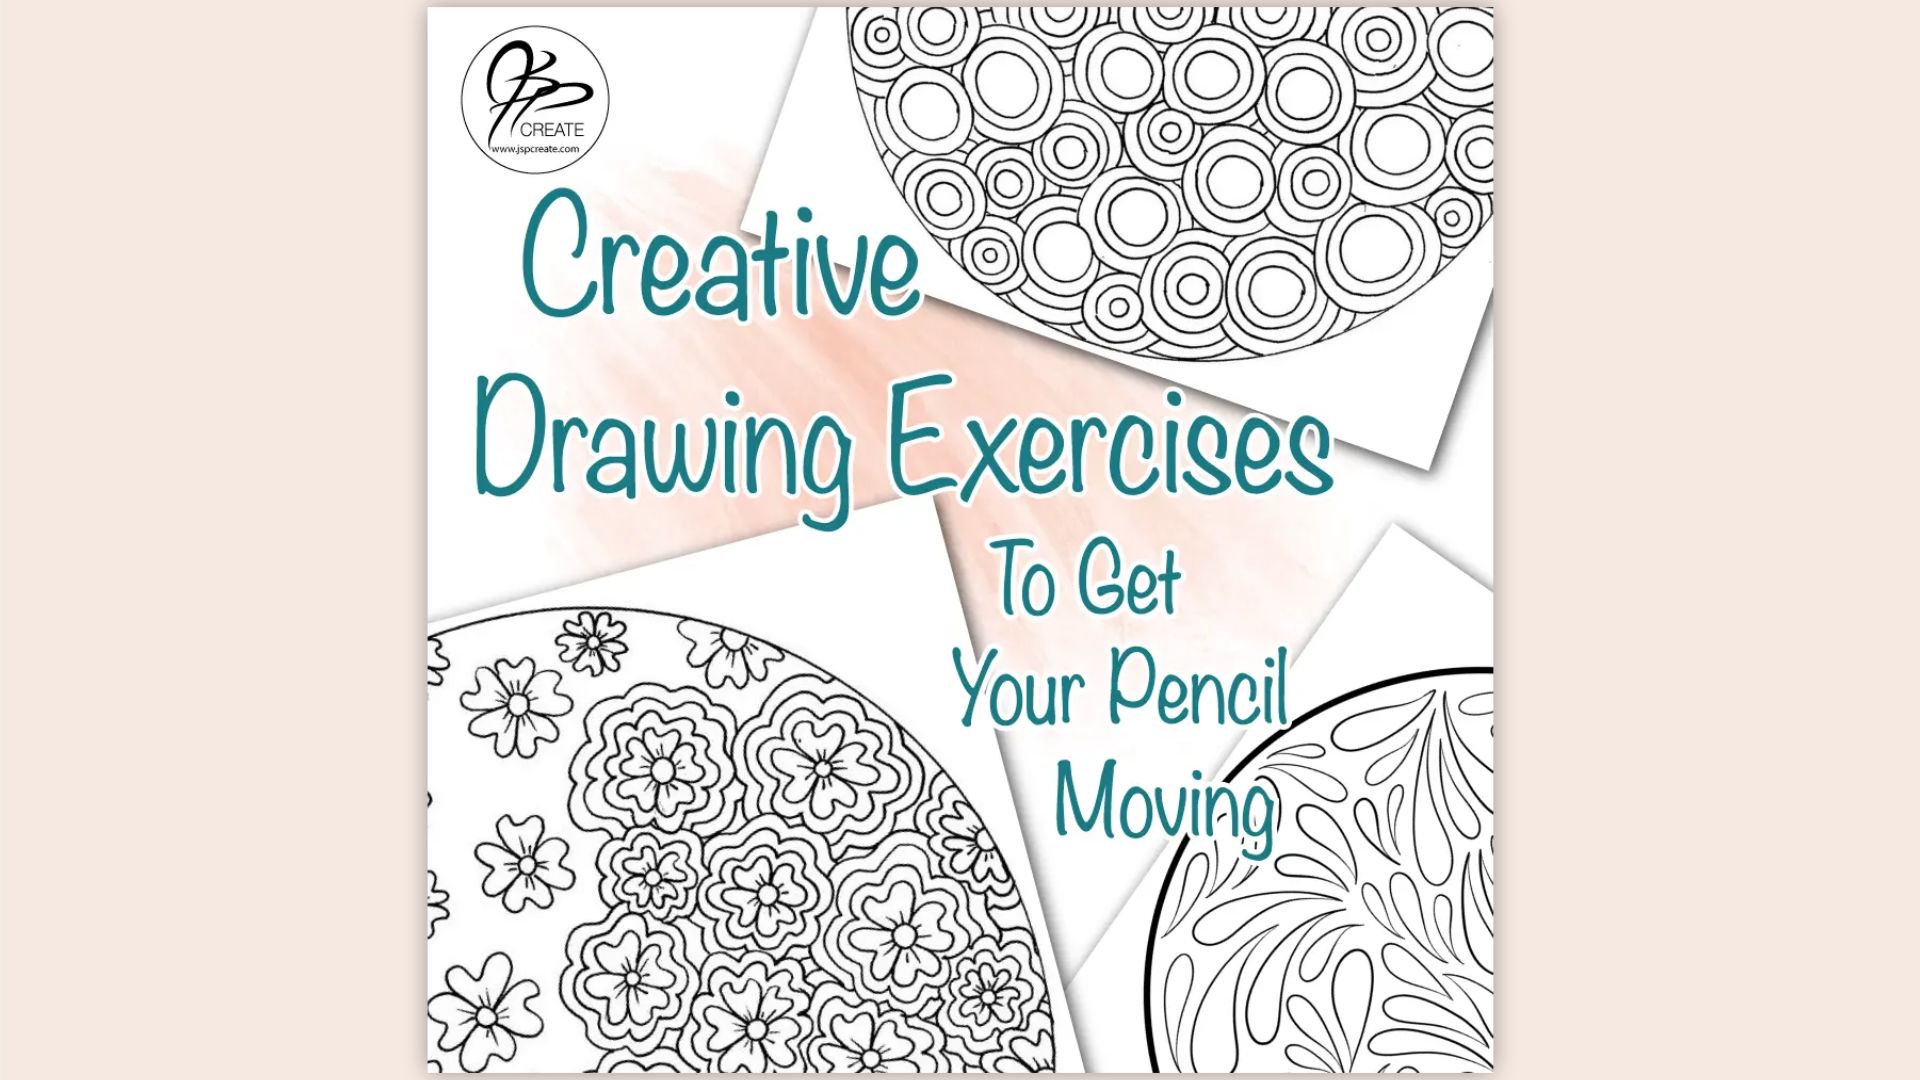 17 Digital Drawing Exercises To Boost Your Artistic Skills!